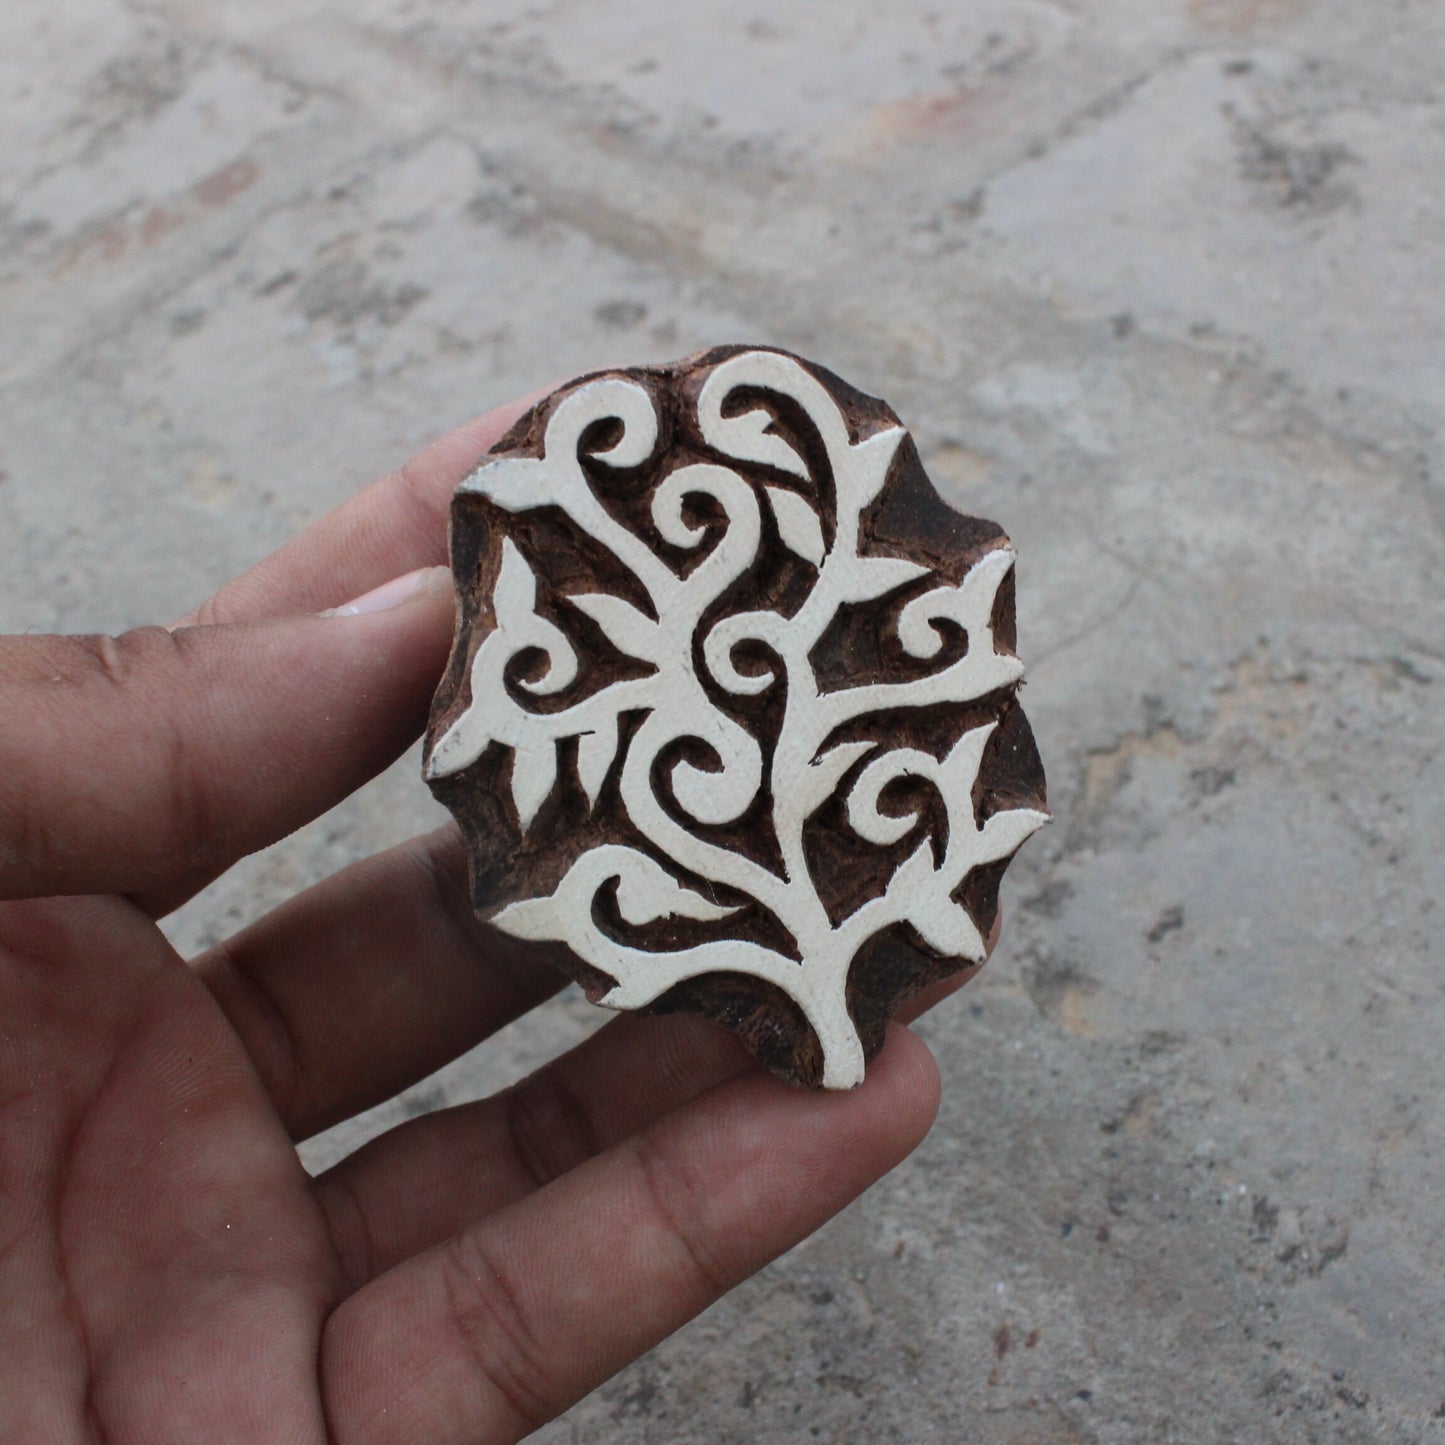 Plant Fabric Stamp Tree Fabric Block Print Stamp Hand Carved Block Stamp Hand Carved Textile Block For Printing Leaves Soap Making Stamp